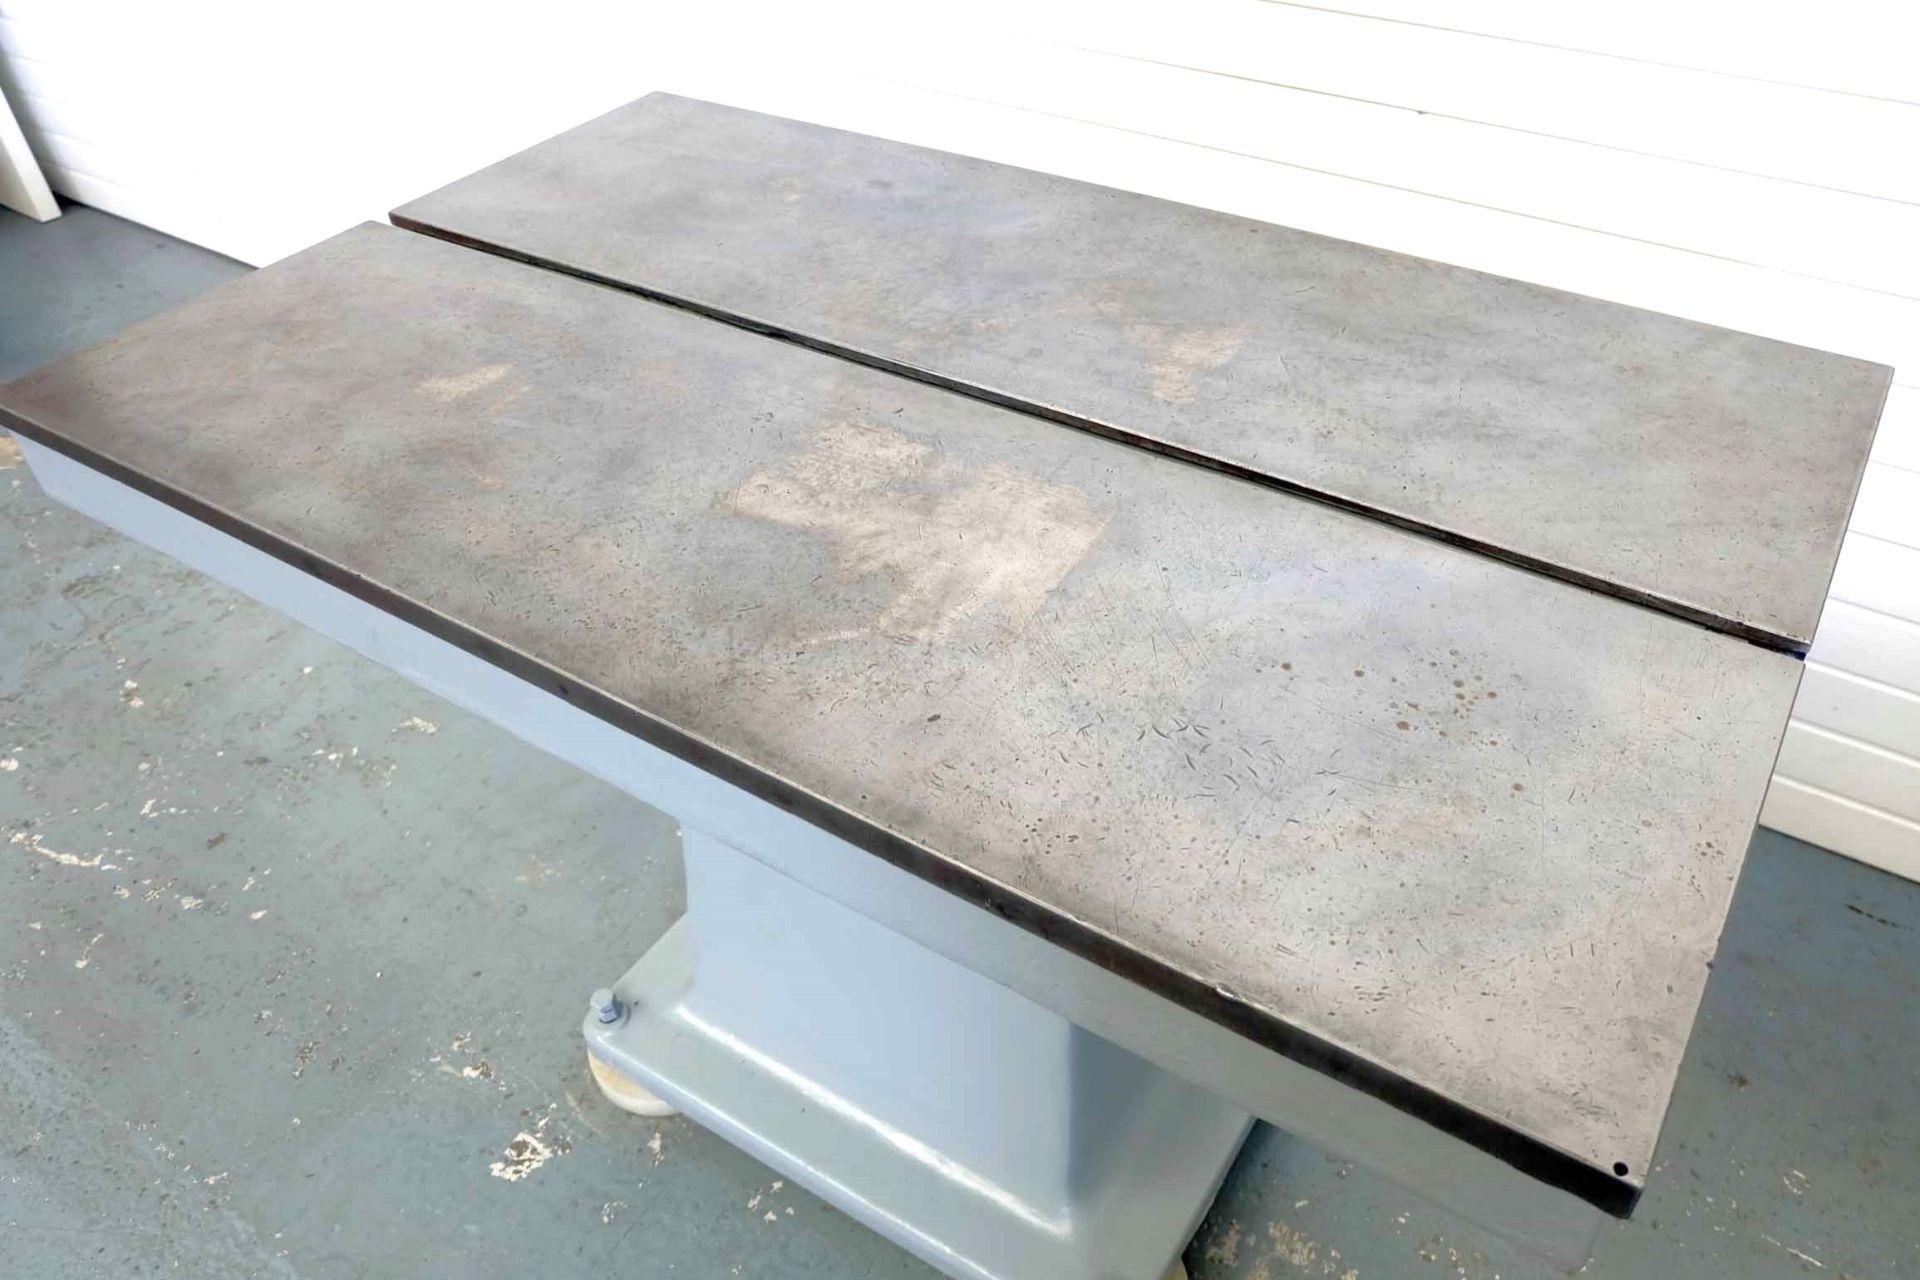 Cast Iron Surface Table With Tee Slot . Size: 54" x 32". Surface Height: 34". - Bild 4 aus 6